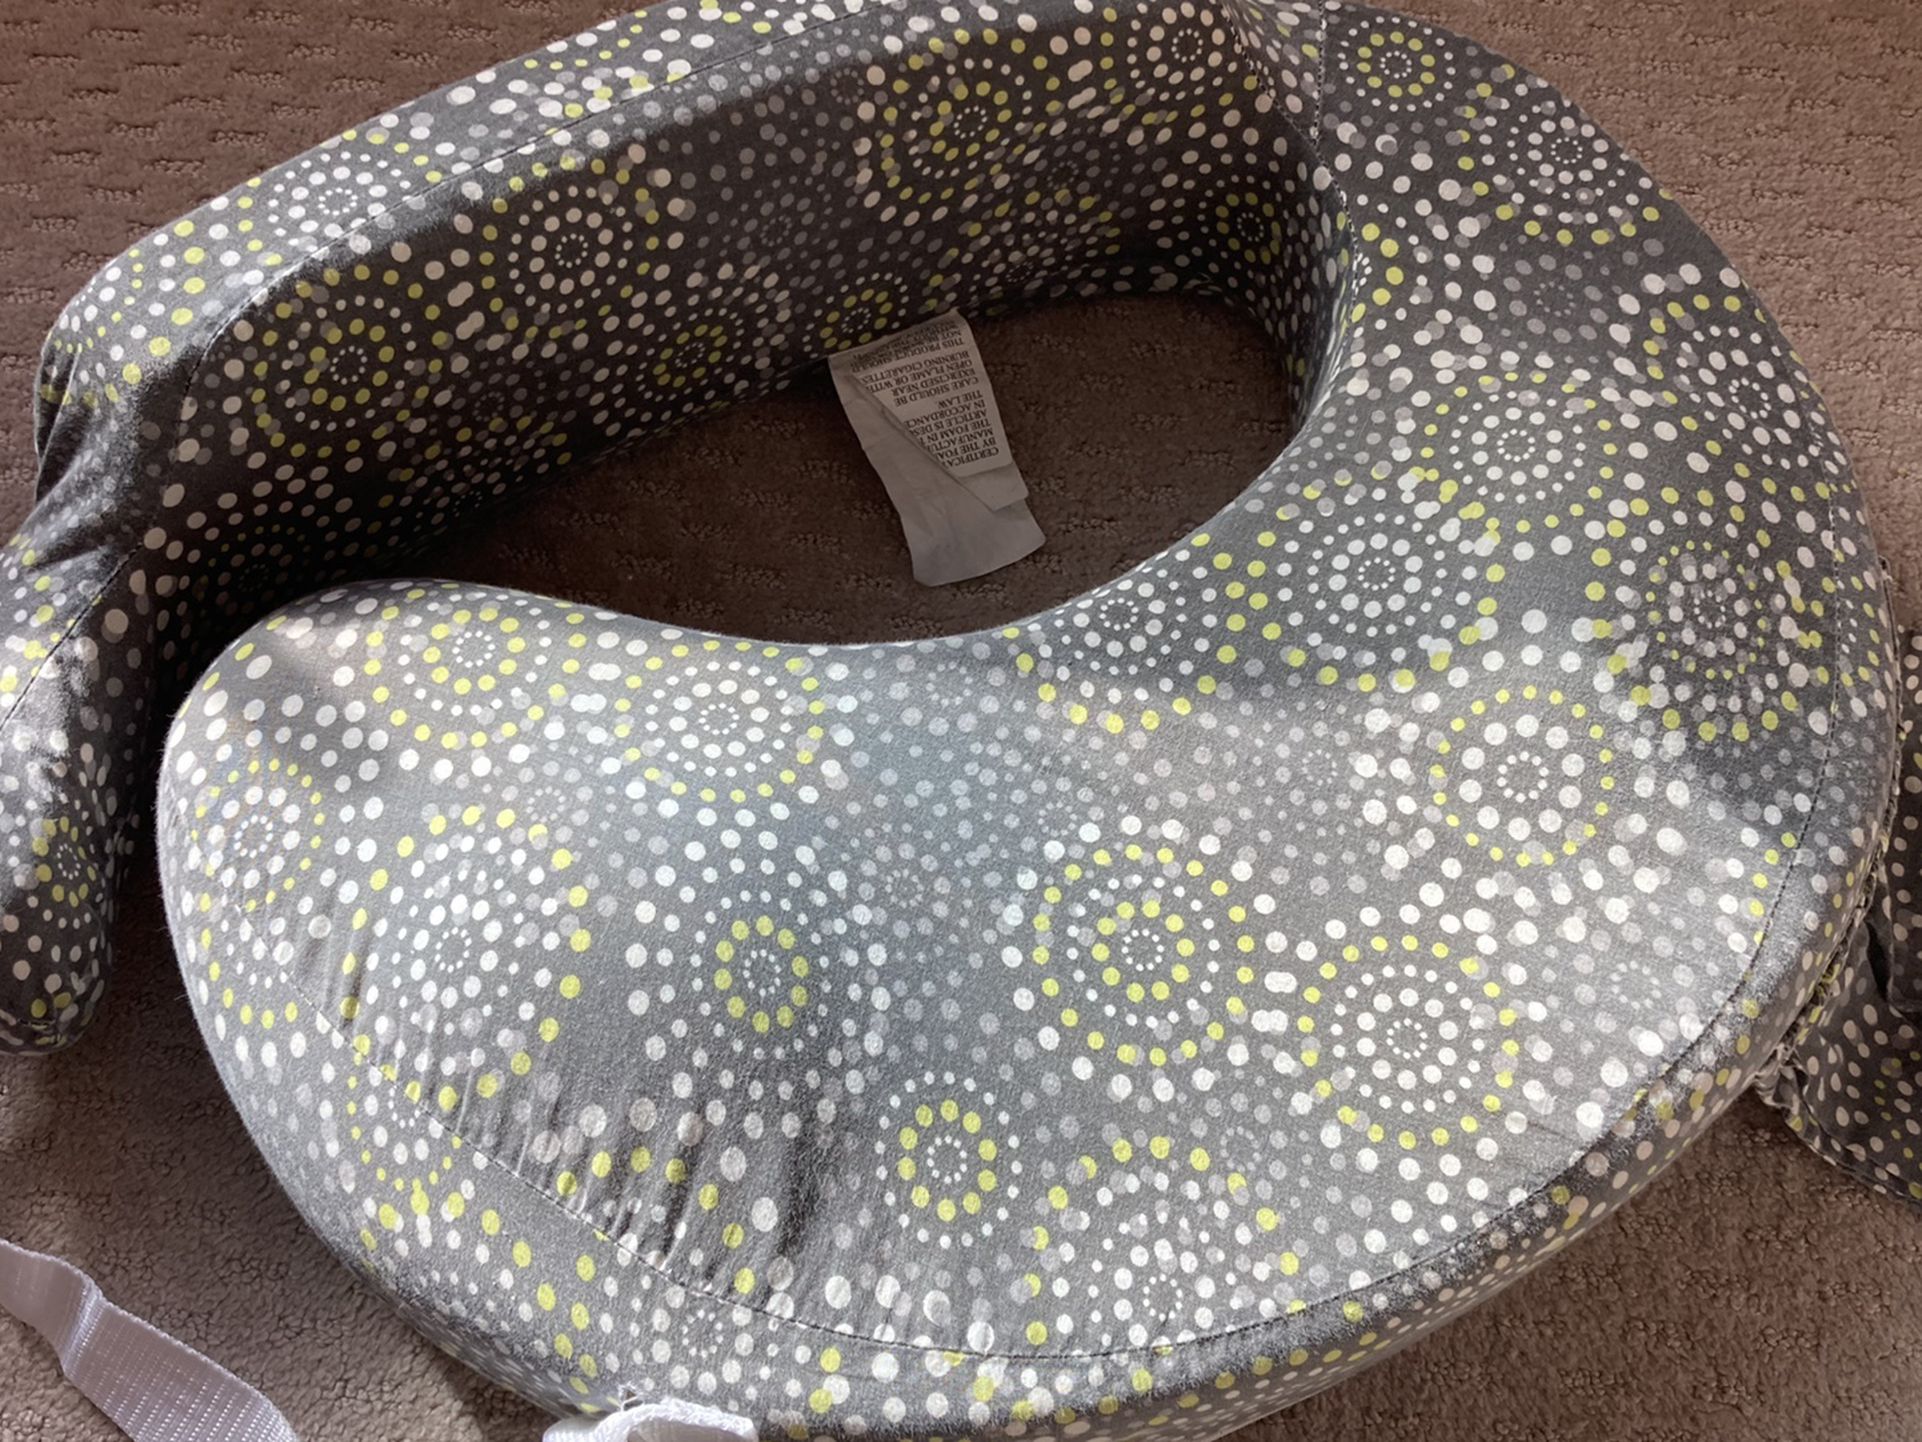 Free : My breast friend Breastfeeding Pillow (includes Washable Covering)